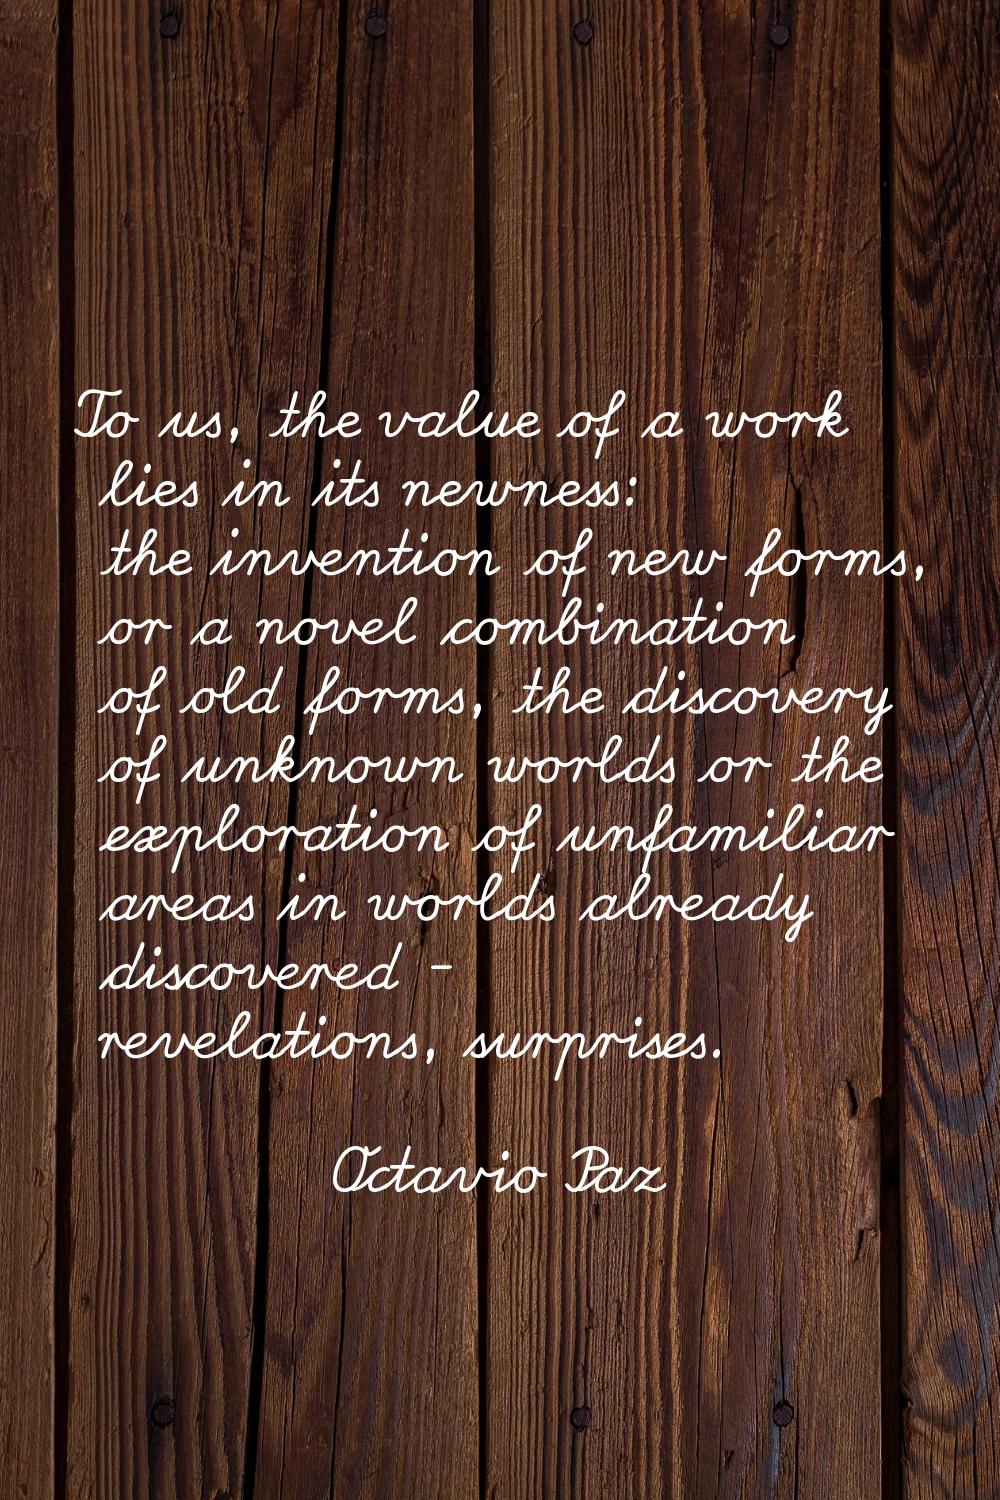 To us, the value of a work lies in its newness: the invention of new forms, or a novel combination 